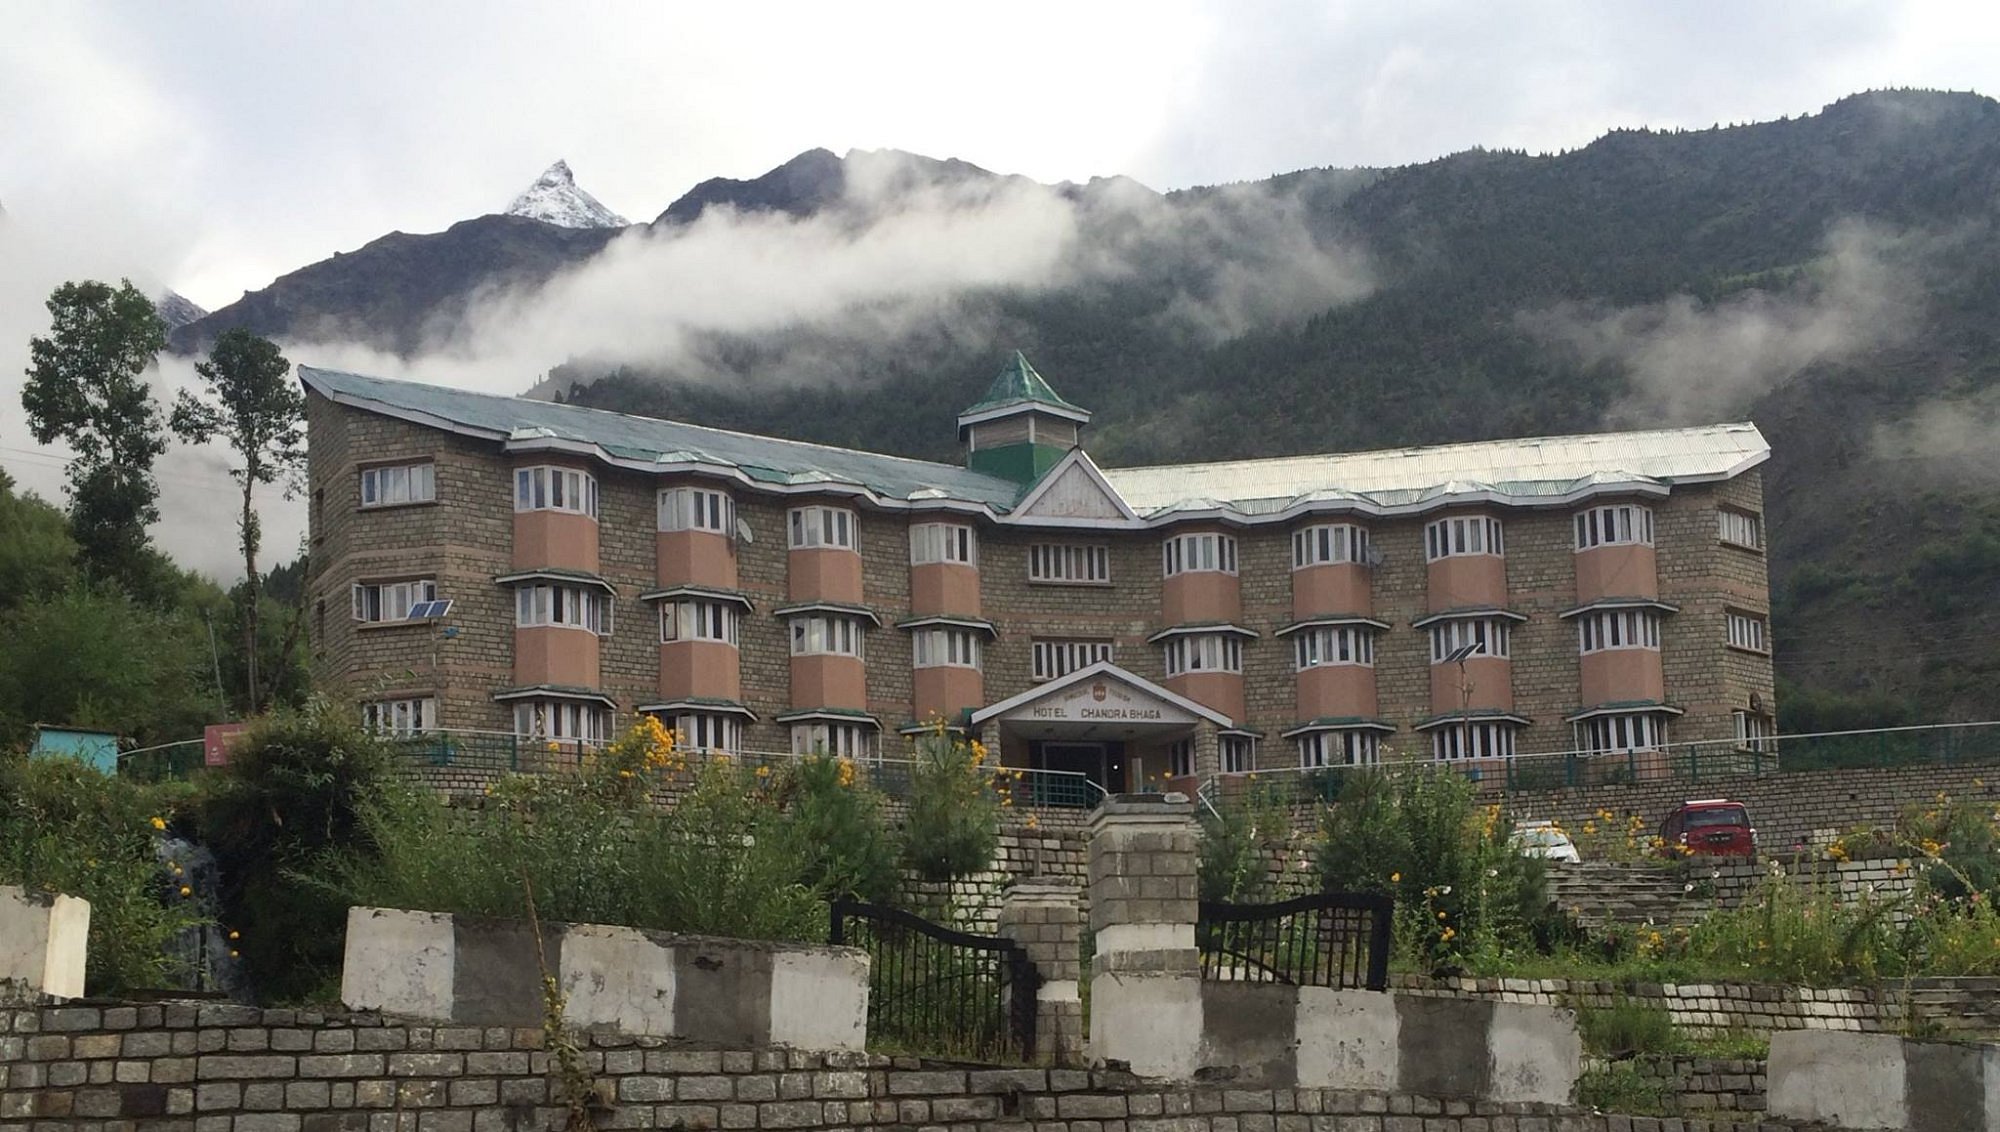 himachal tourism hotel in keylong